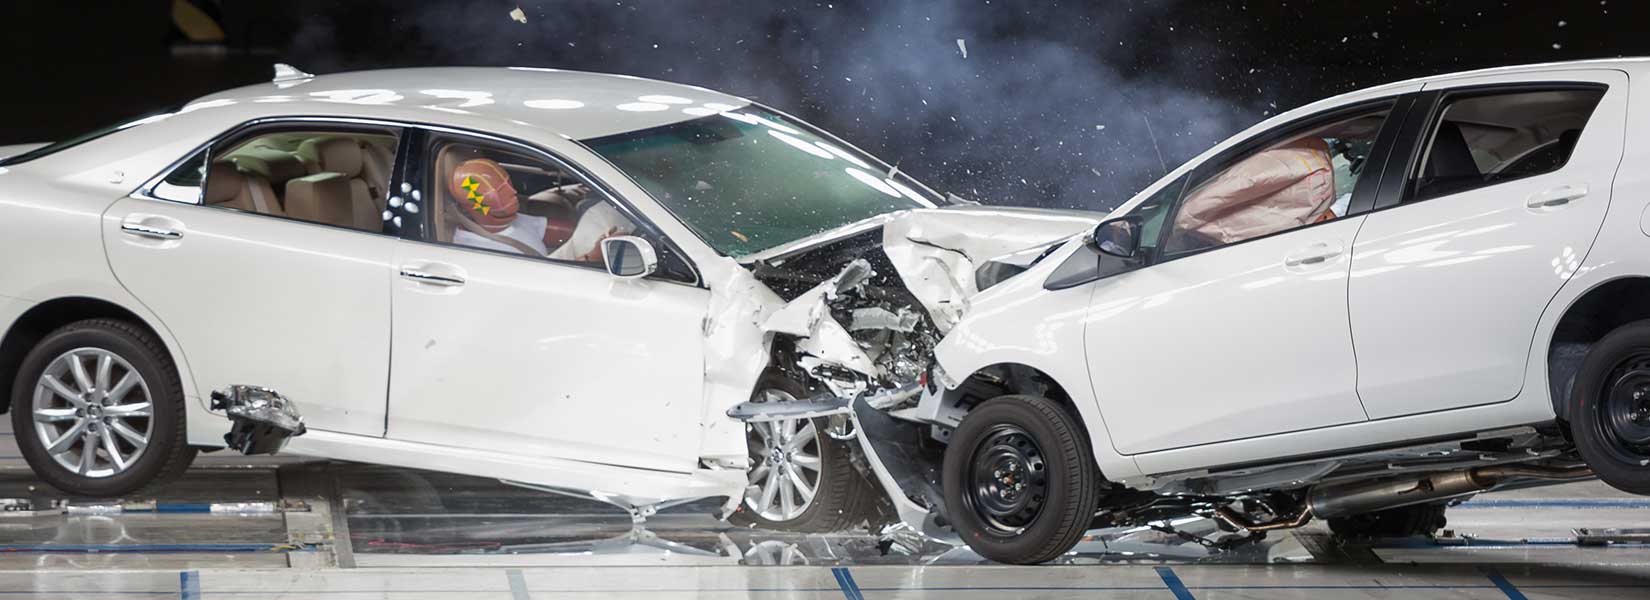 How Long After a Car Accident Can You Claim Injury in Ohio